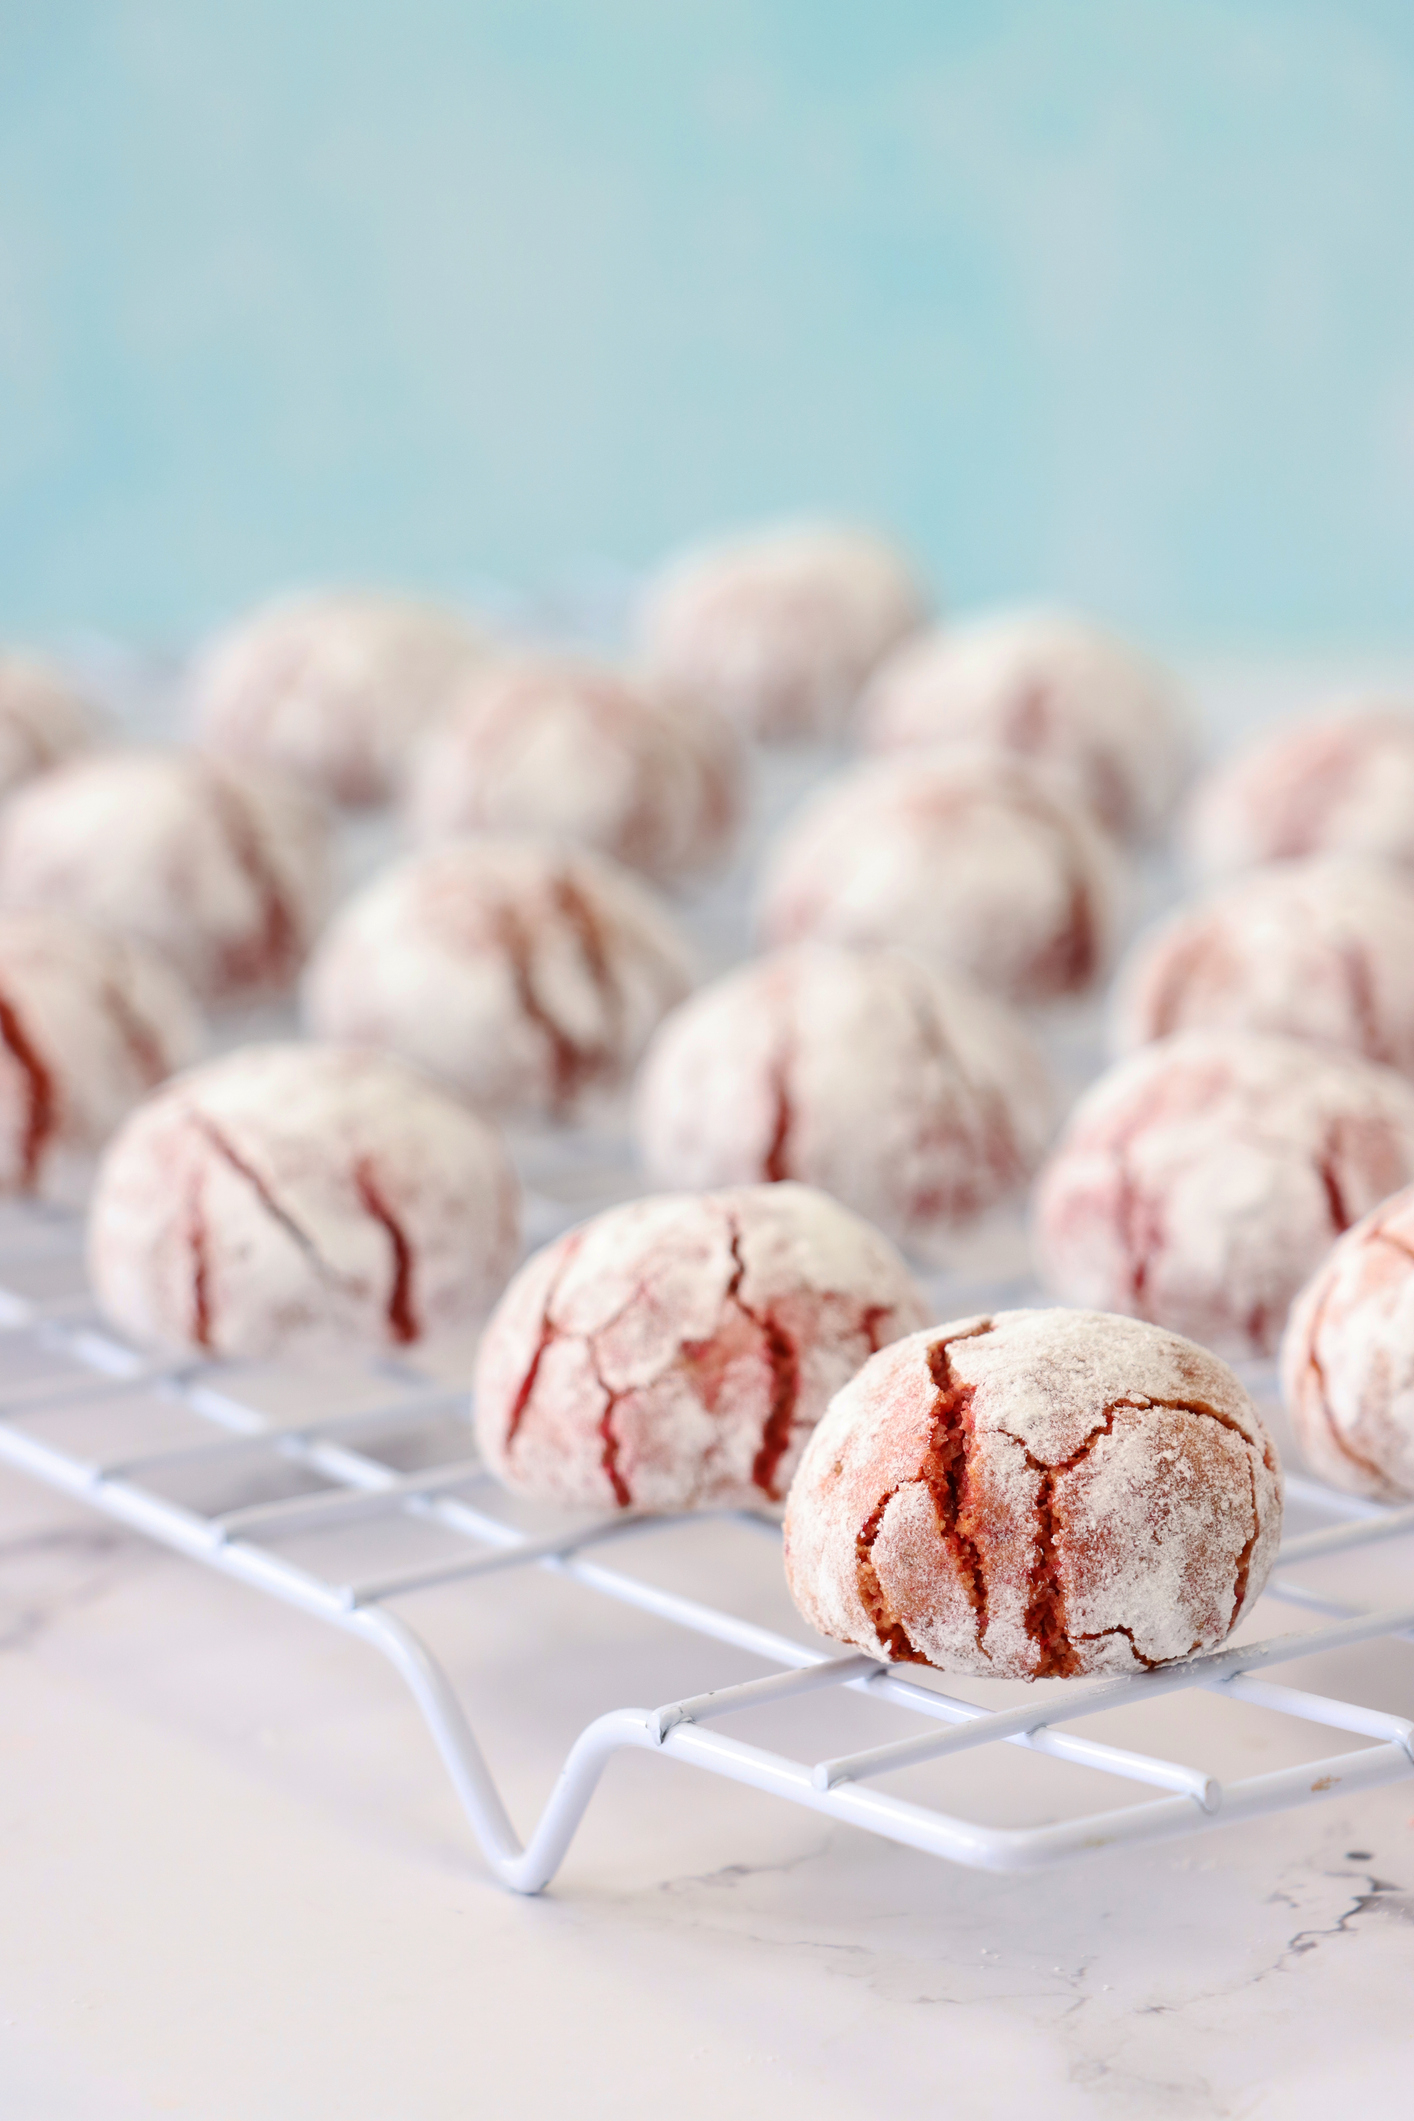 Freshly baked crinkle cookies on a wire rack, with powdered sugar coating